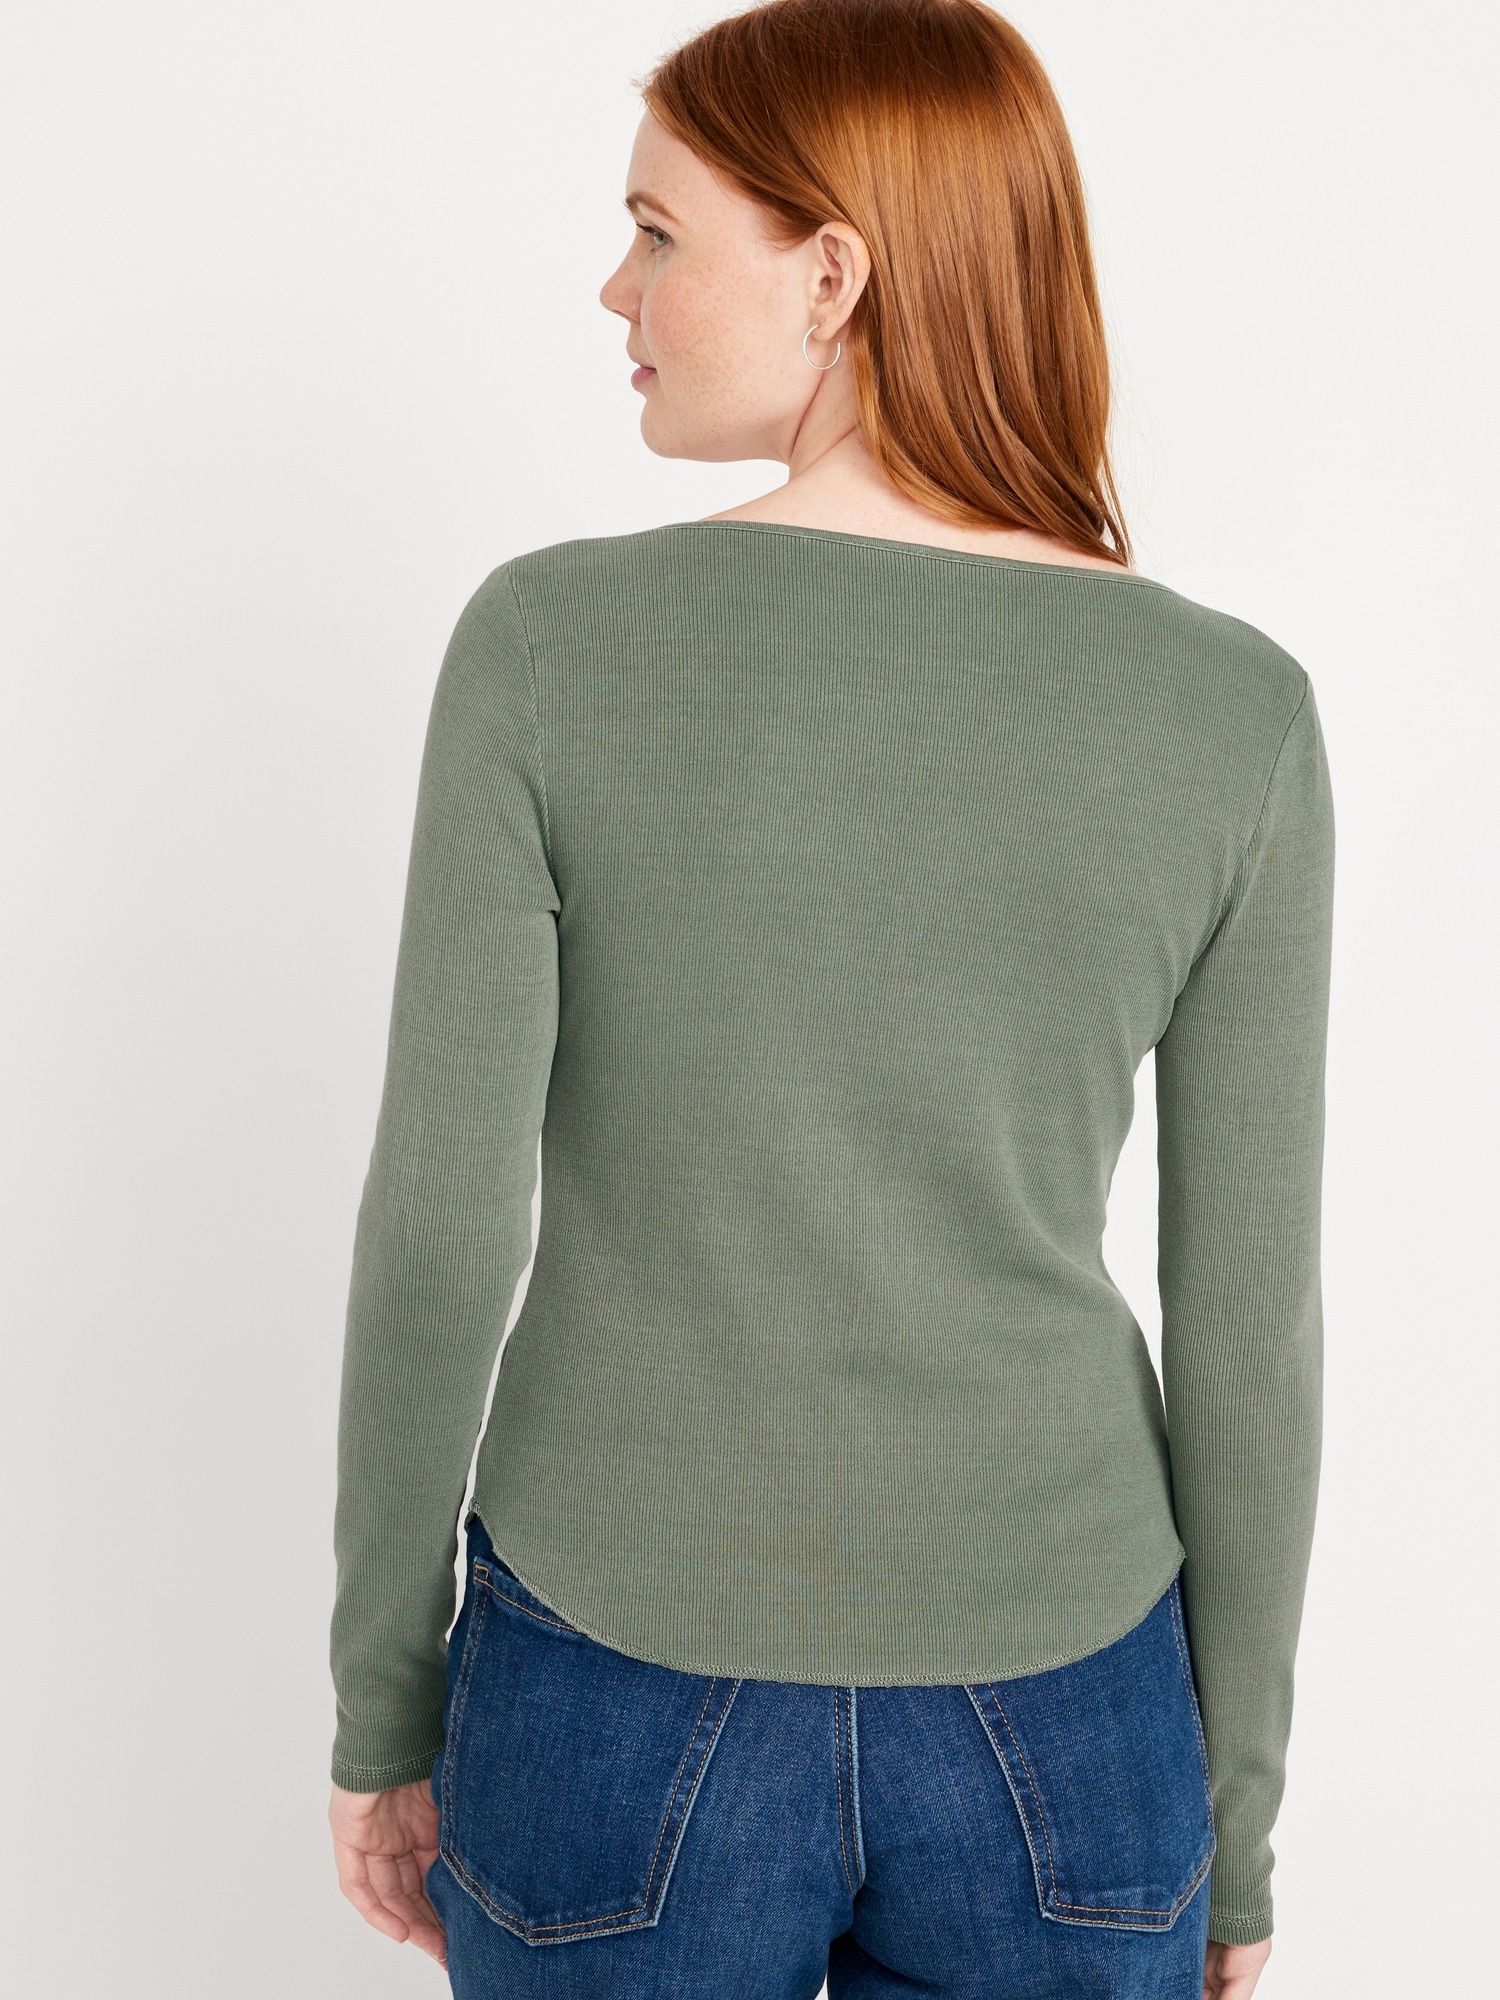 Fitted Long-Sleeve Rib-Knit T-Shirt | Old Navy